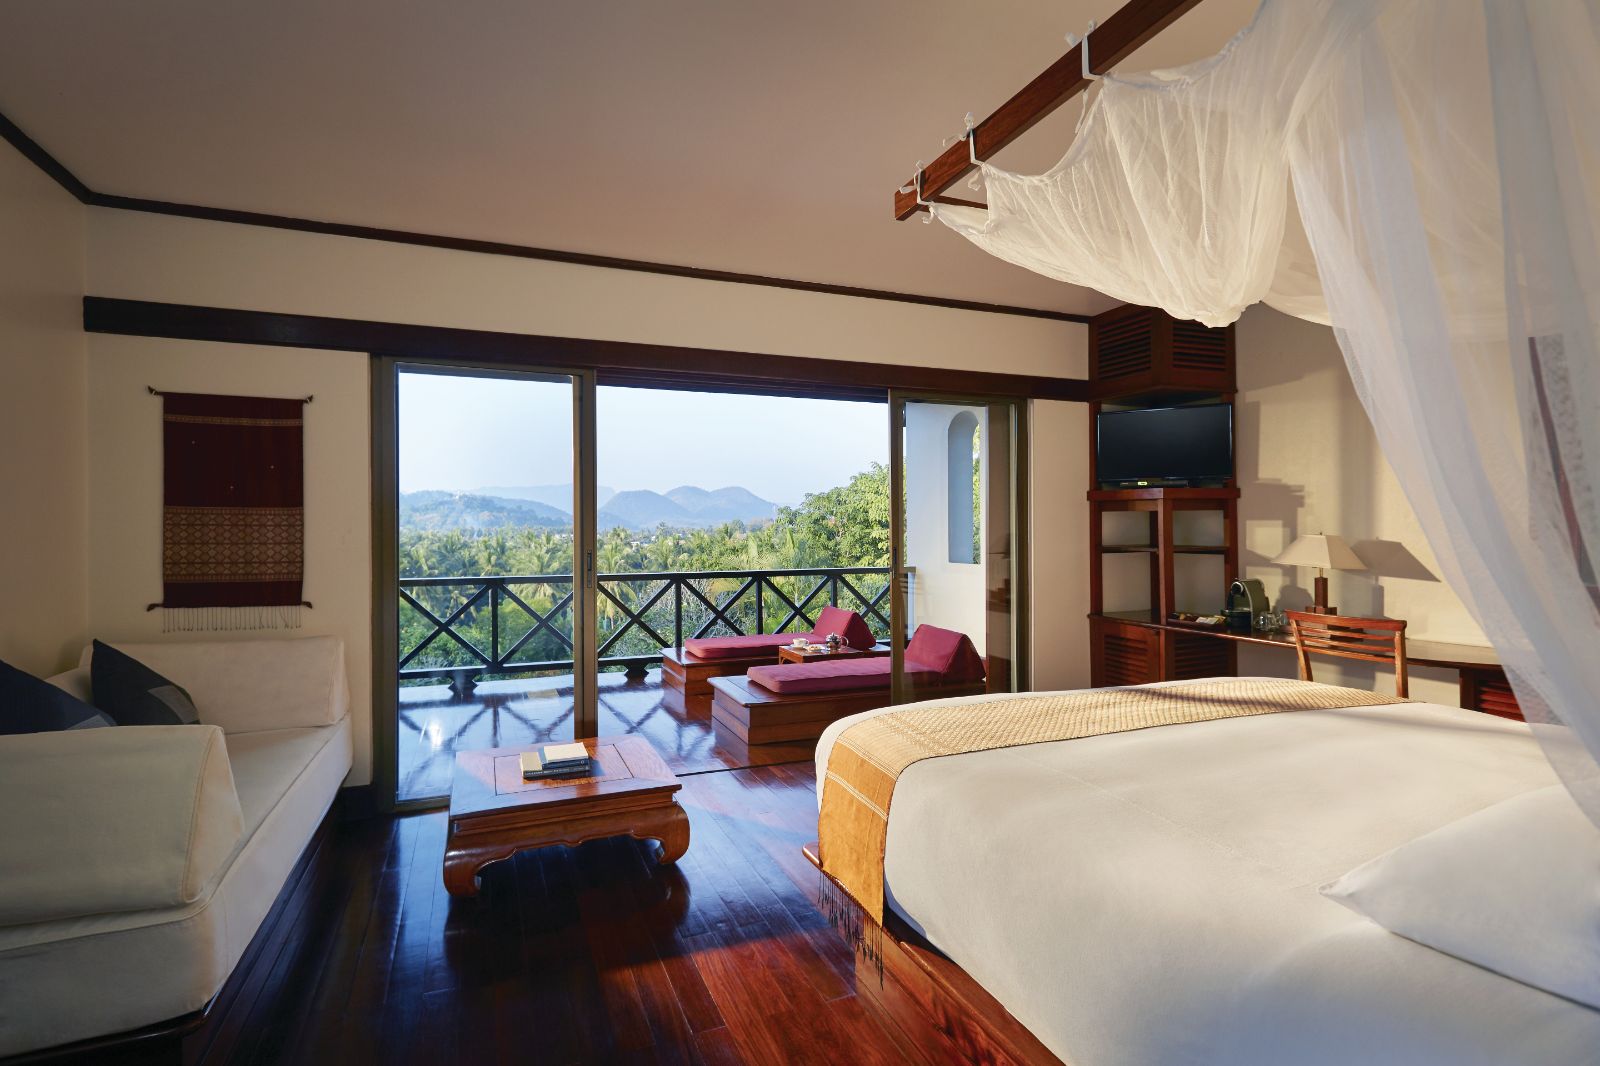 Guest suite with deck at La Residence Phao Vao in Luang Prabang, Laos